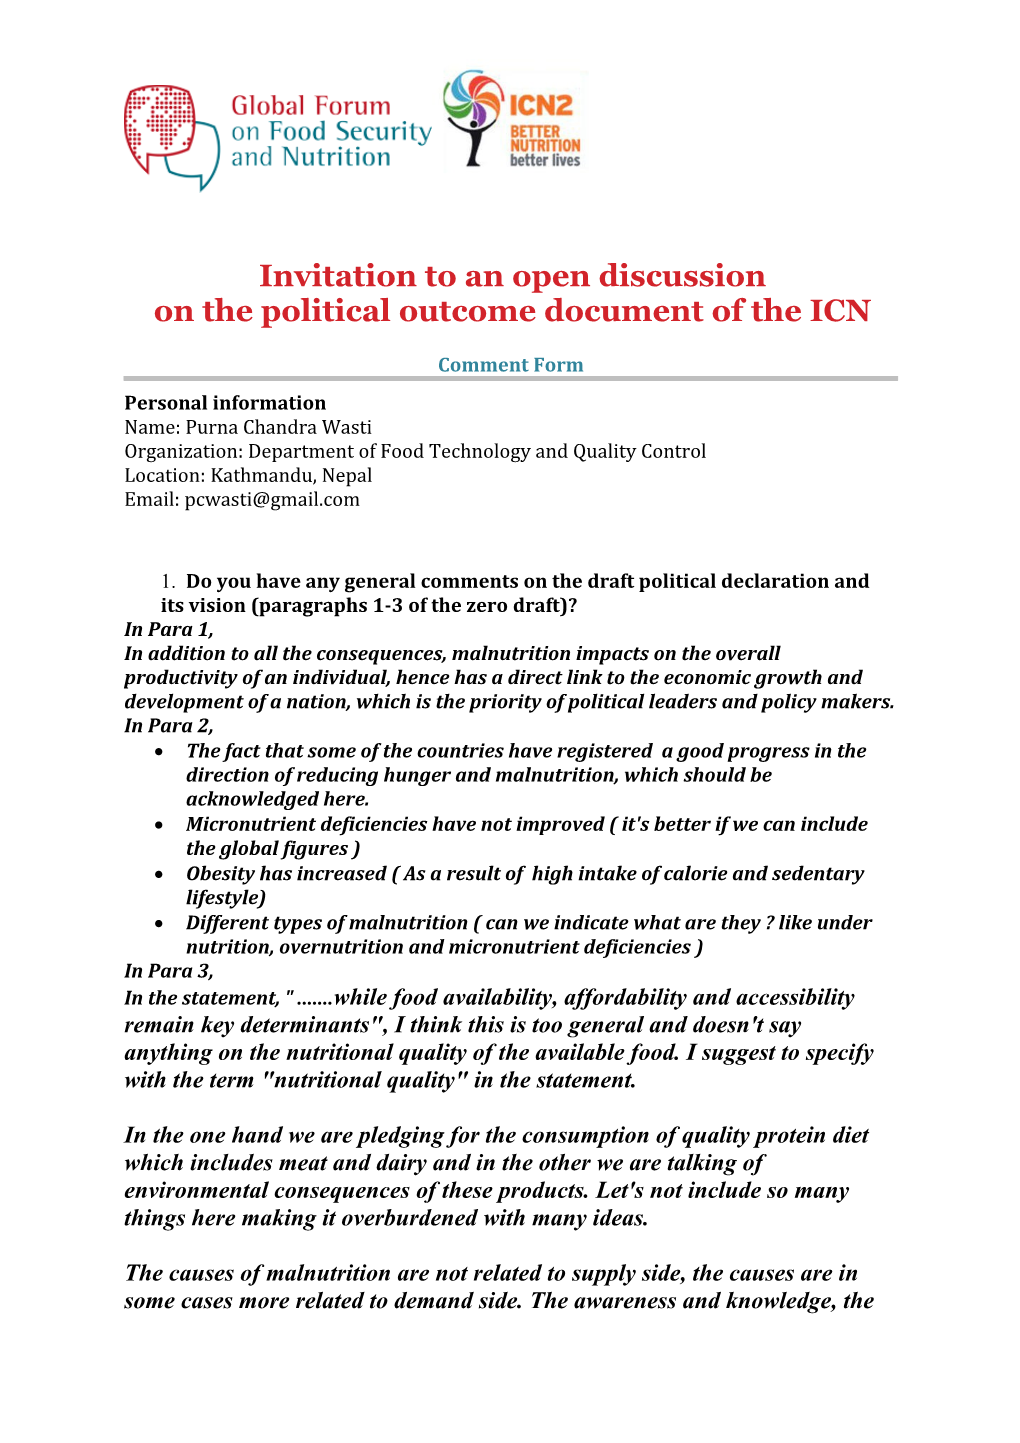 On the Political Outcome Document of the ICN s1